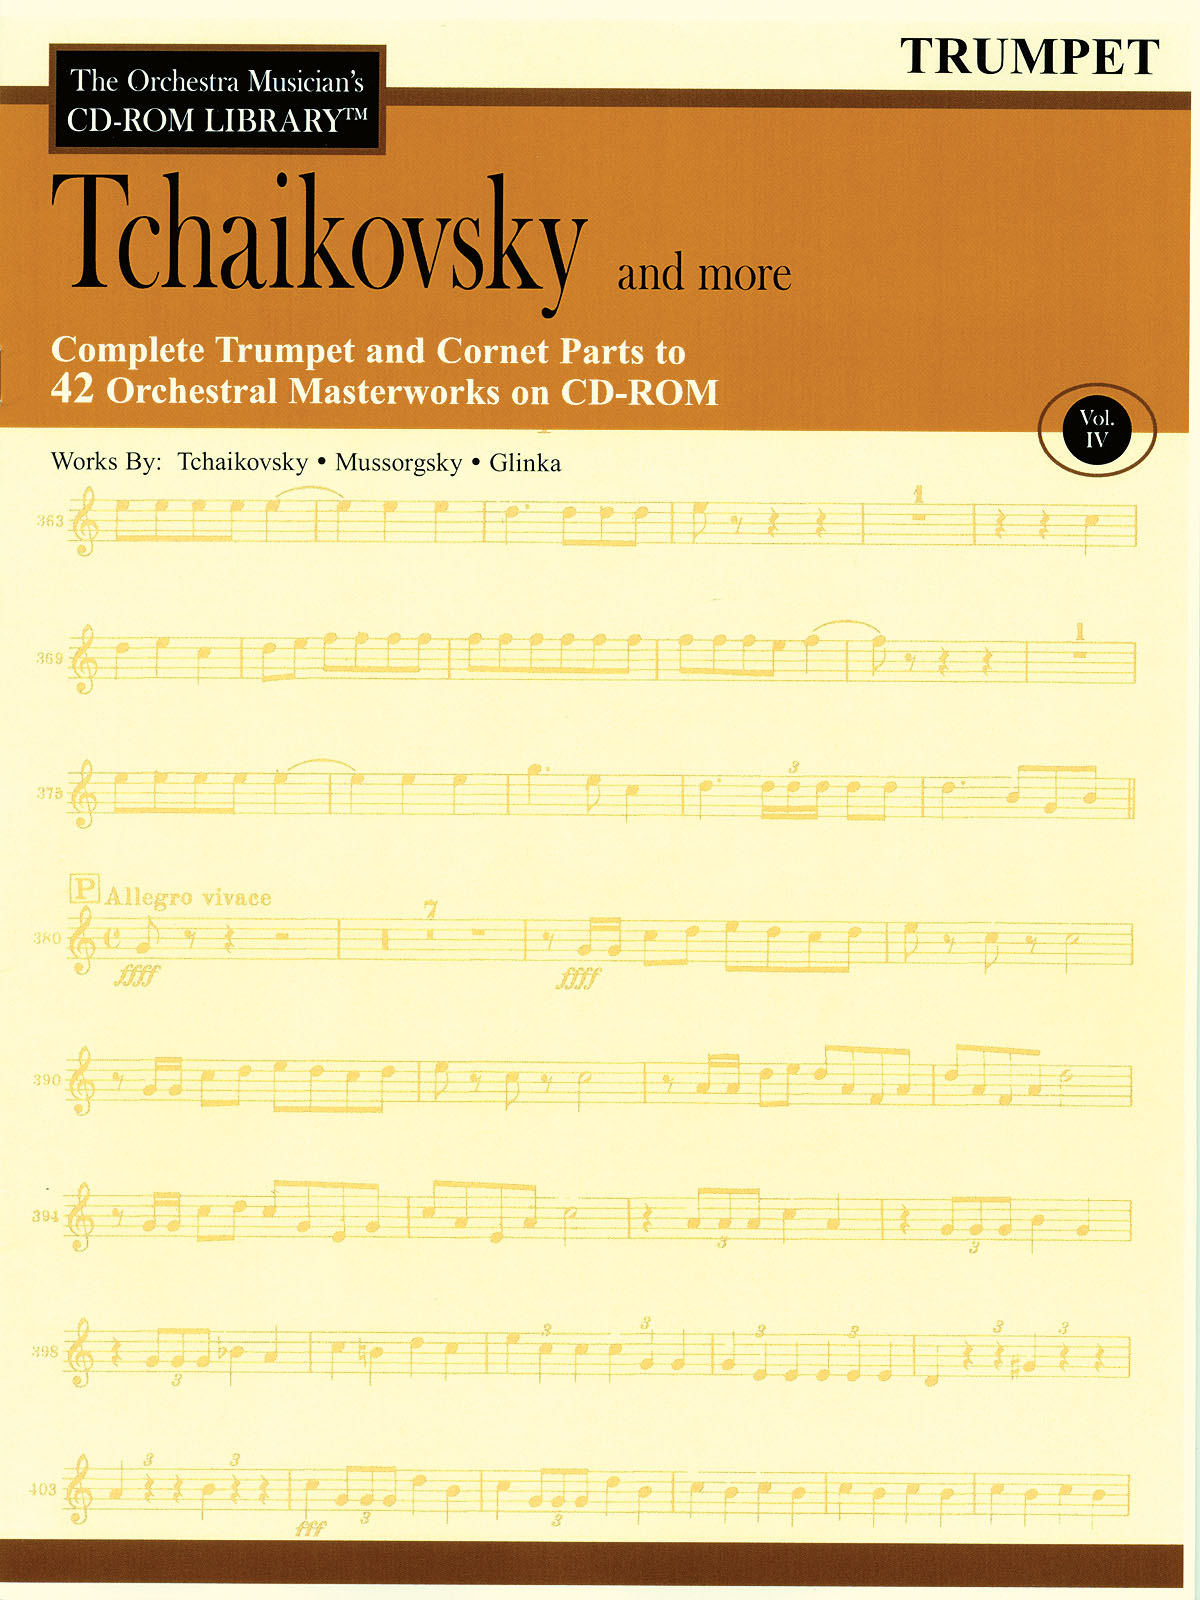 Tchaikovsky and More - Volume 4(The Orchestra Musician's CD-ROM Library - Trumpet)